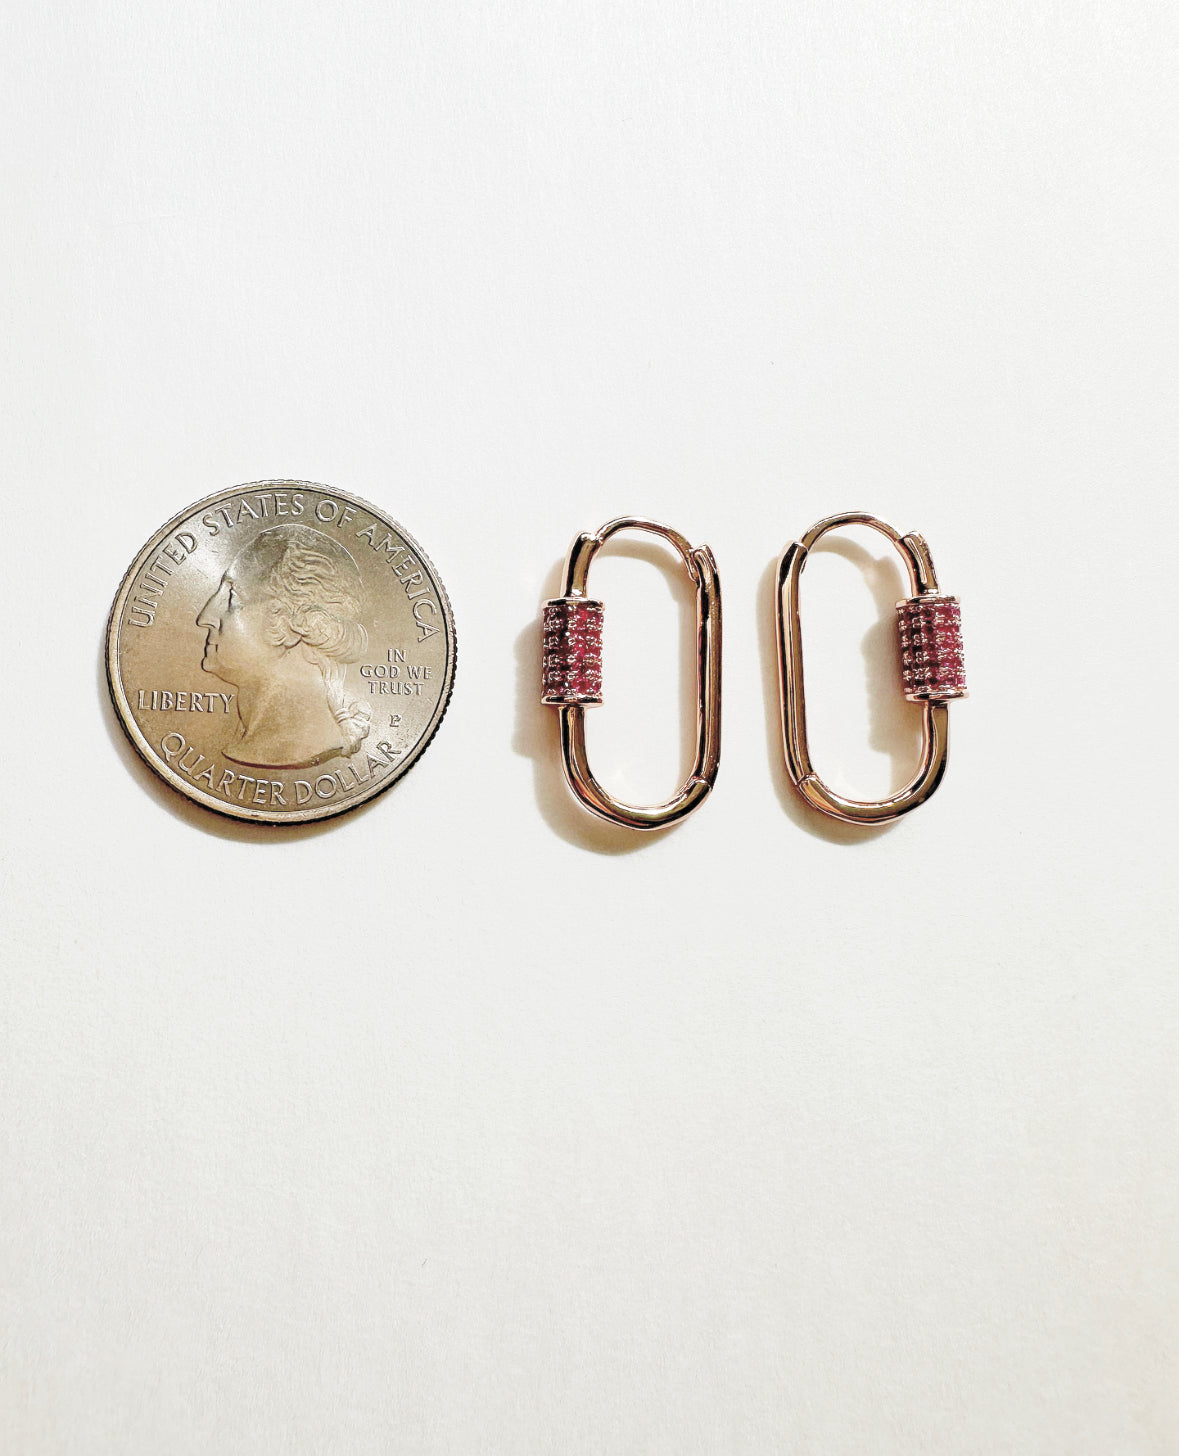 Cherry Blossom Journey Earrings next to a quarter for size comparison.